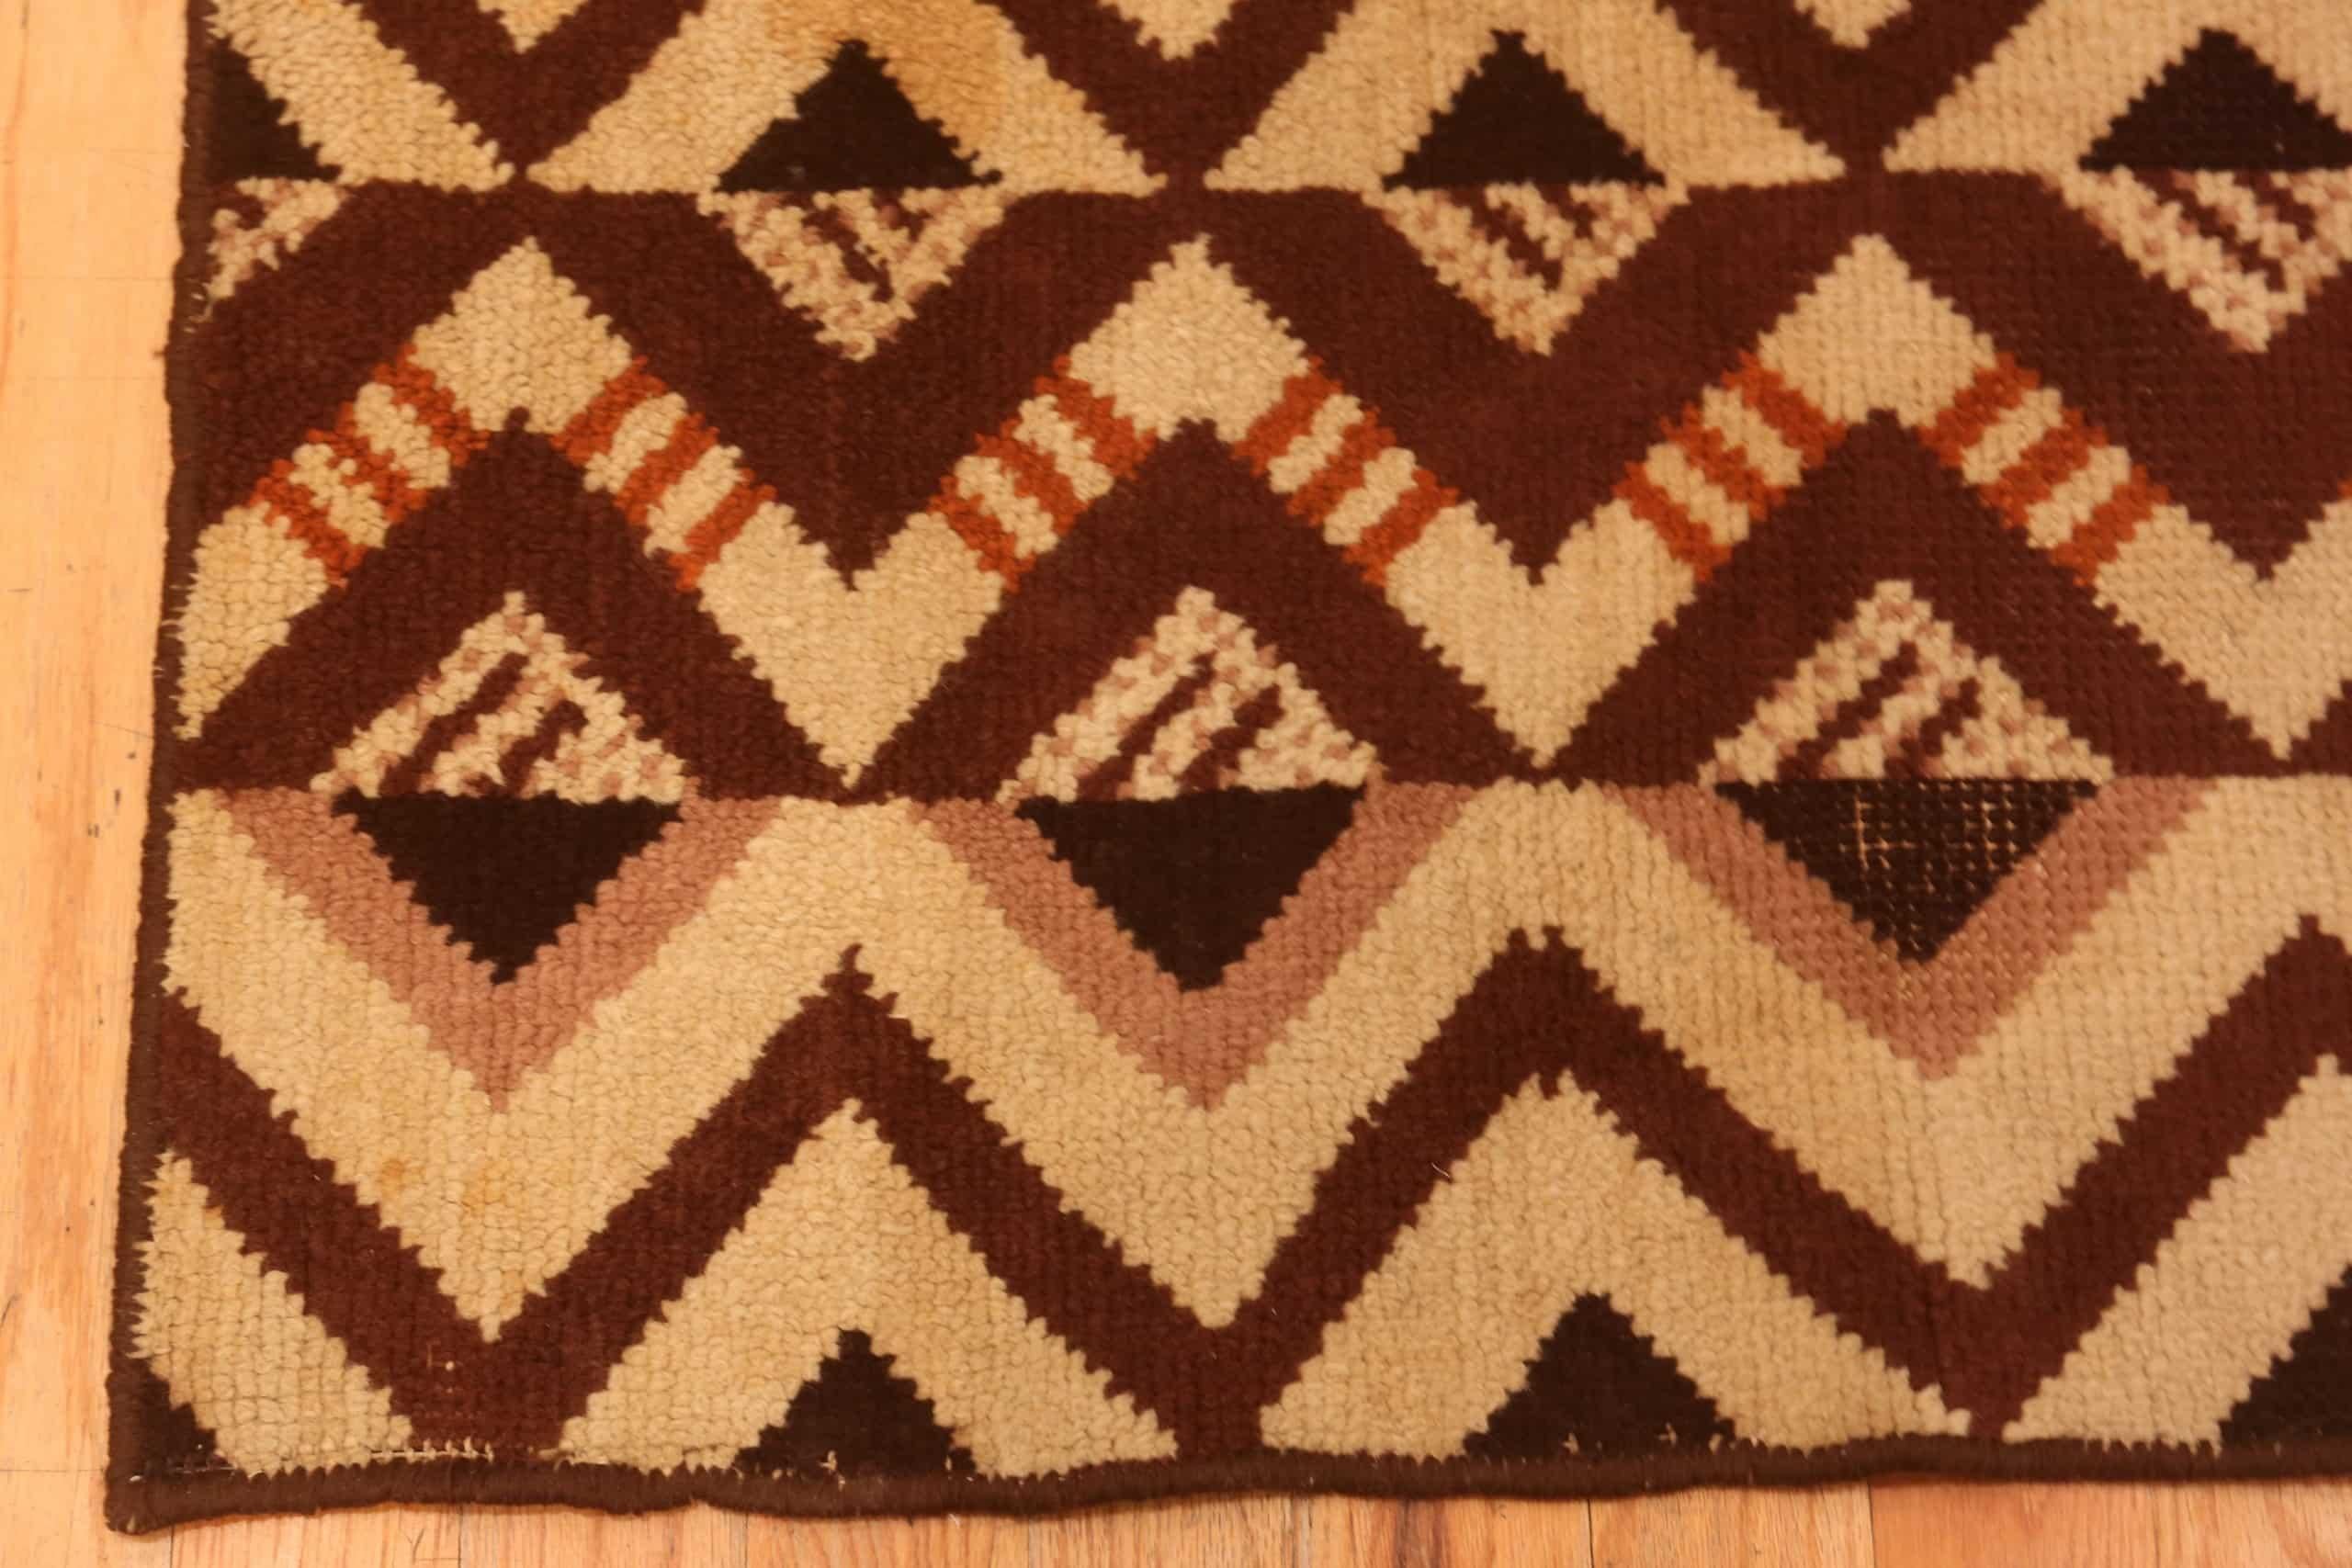 Hand-Knotted Beautiful Geometric Vintage French Art Deco Runner Rug 3' x 14'9